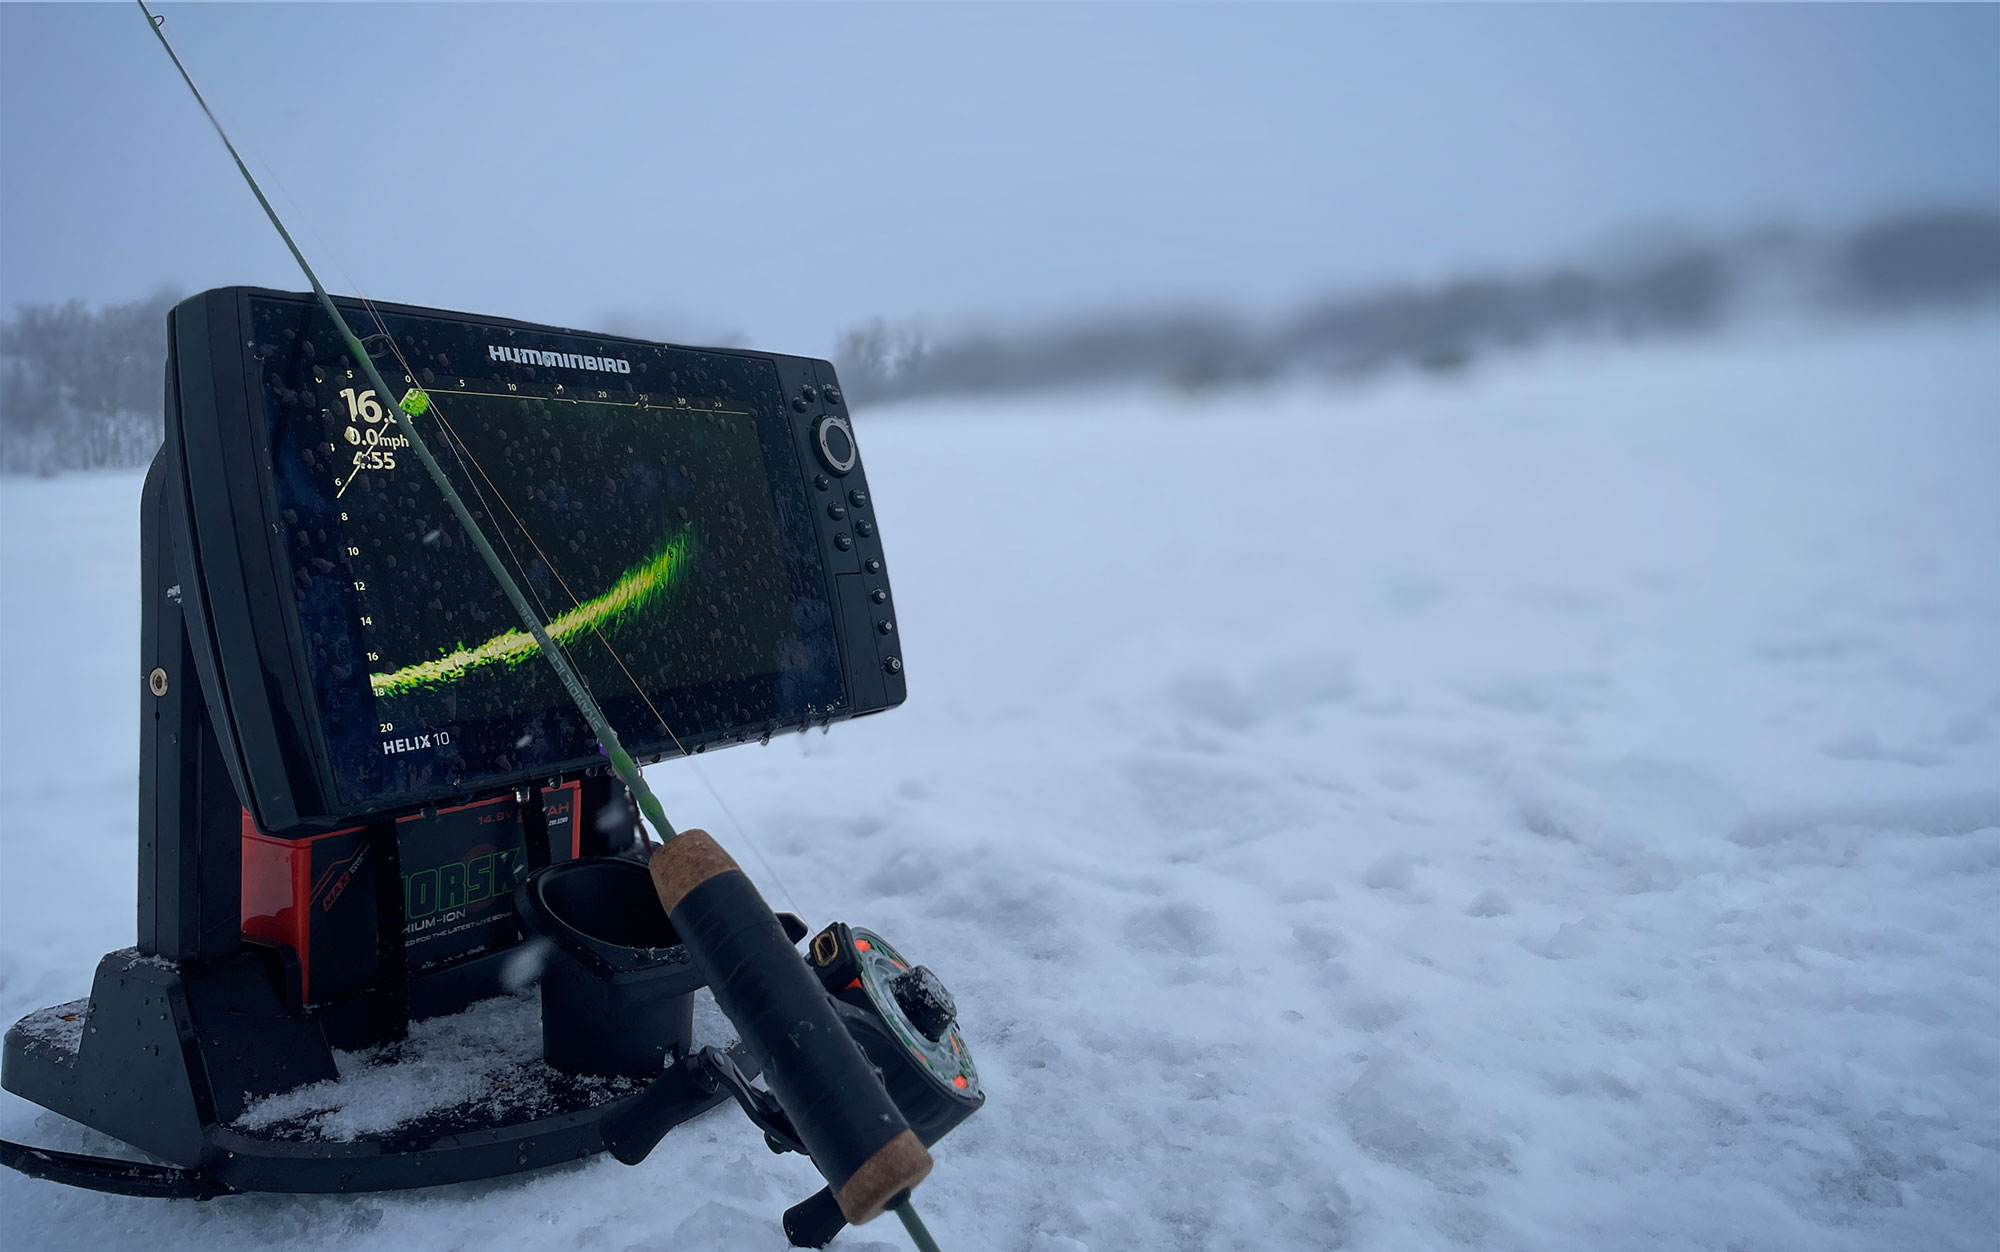 Are you looking to put your Humminbird to work on the ice this